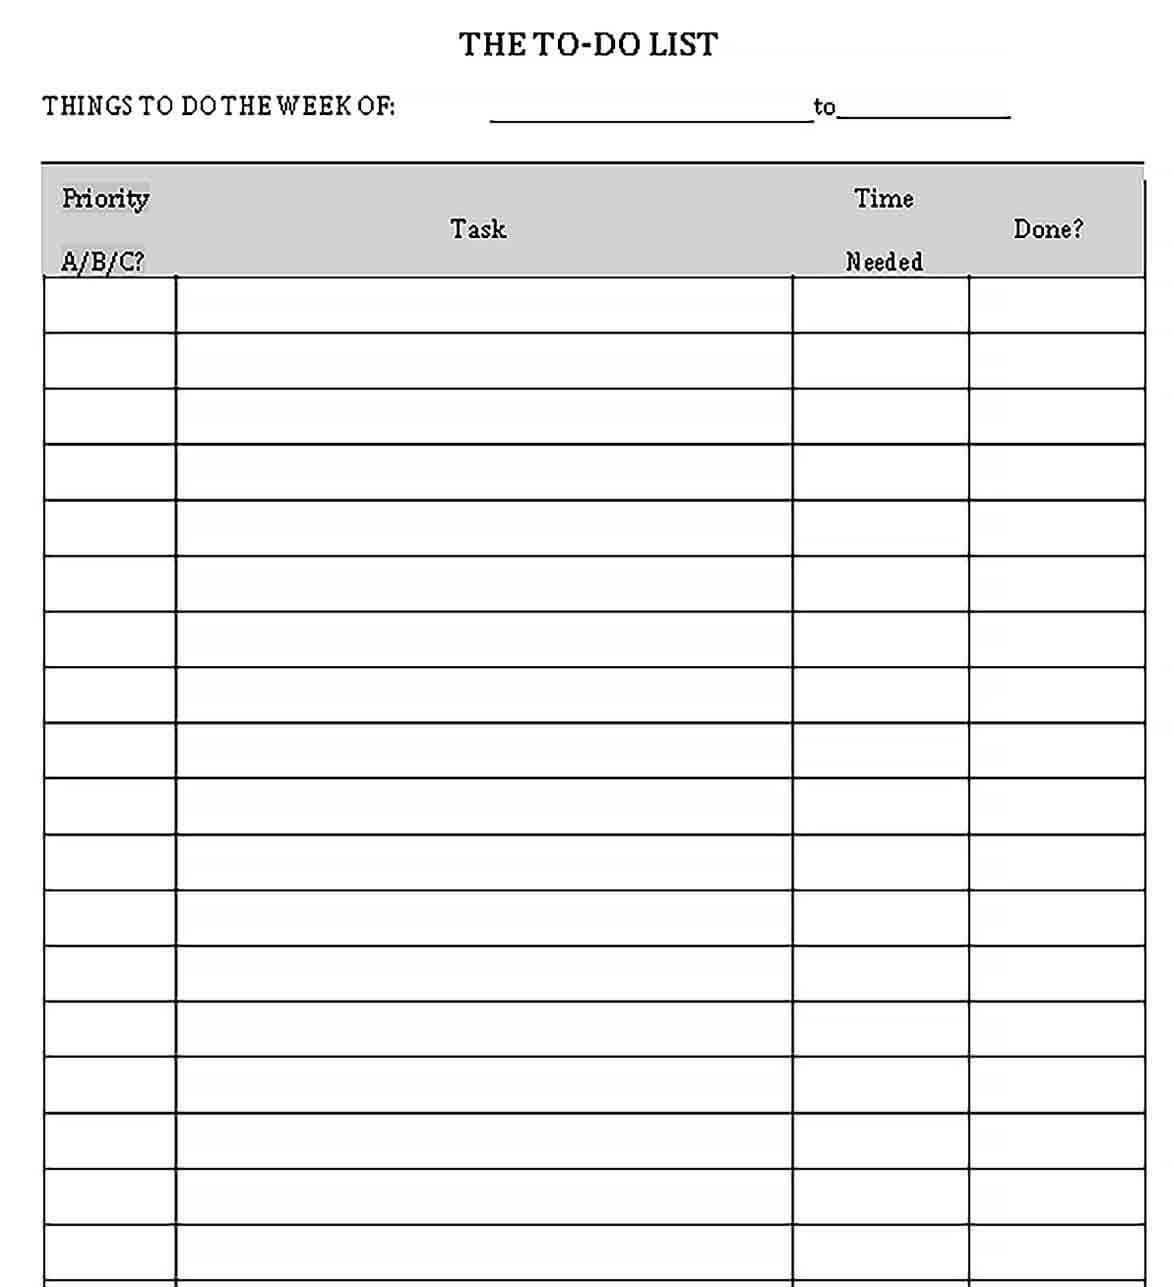 Sample Things To Do Checklist